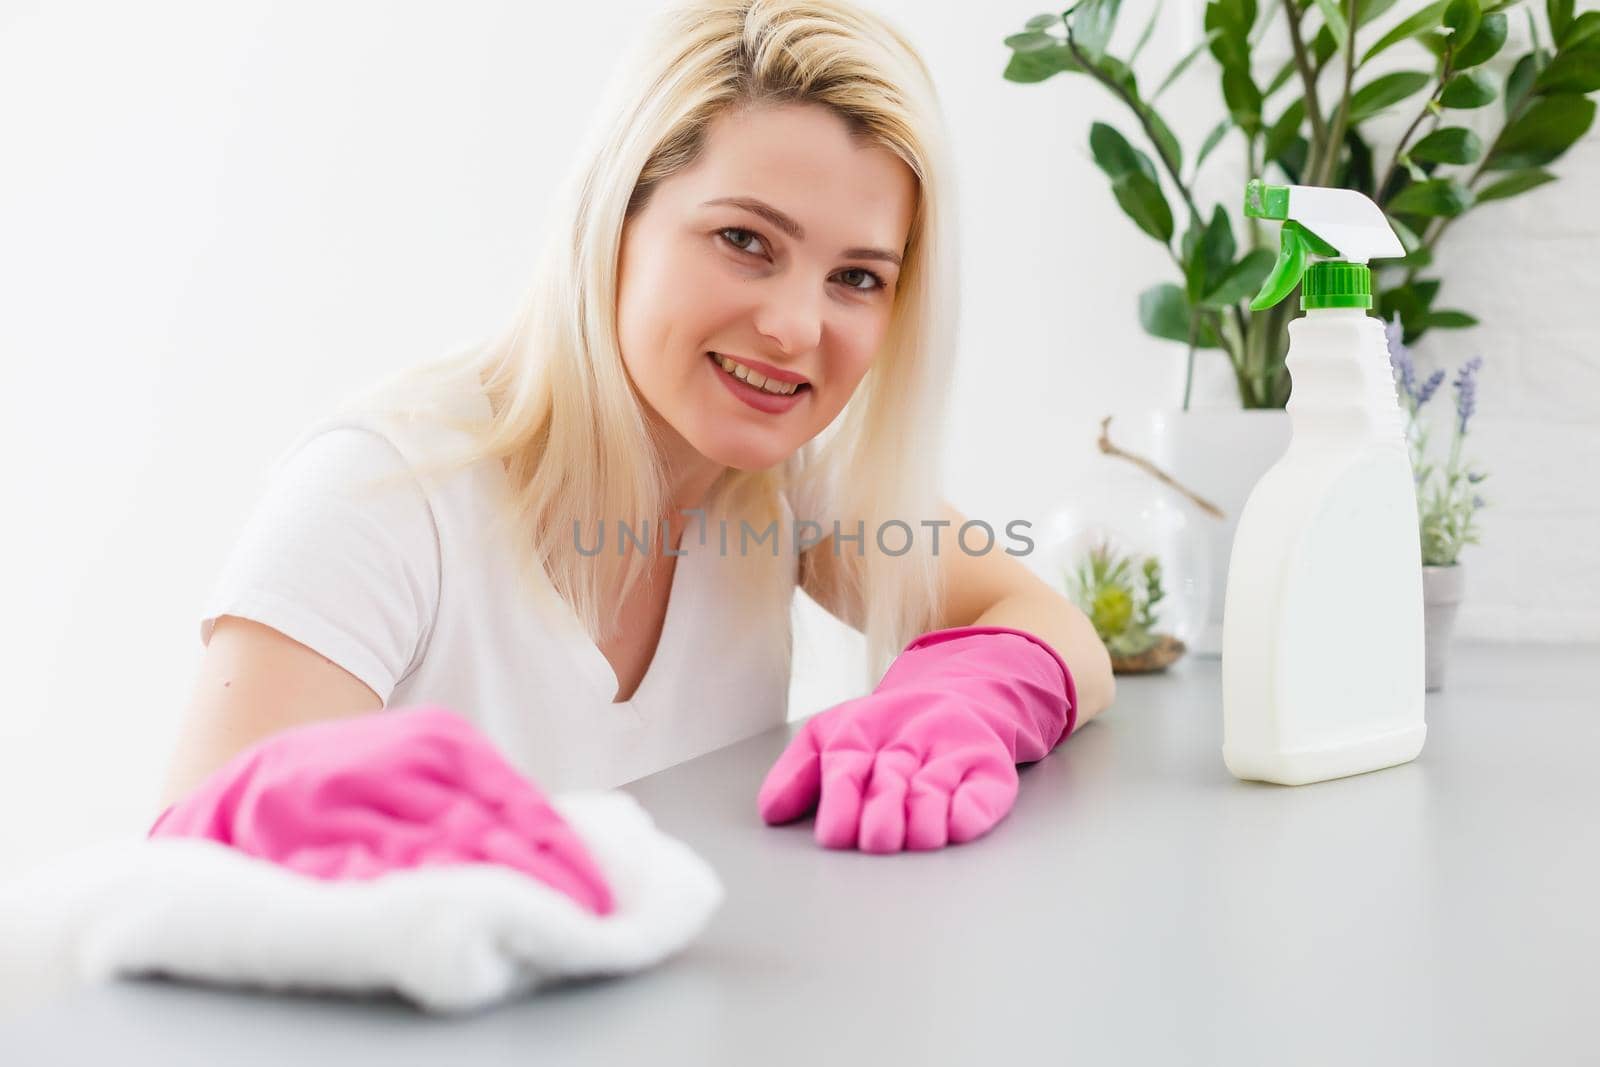 Woman in the kitchen is smiling and wiping dust using a spray and a duster while cleaning her house, close-up